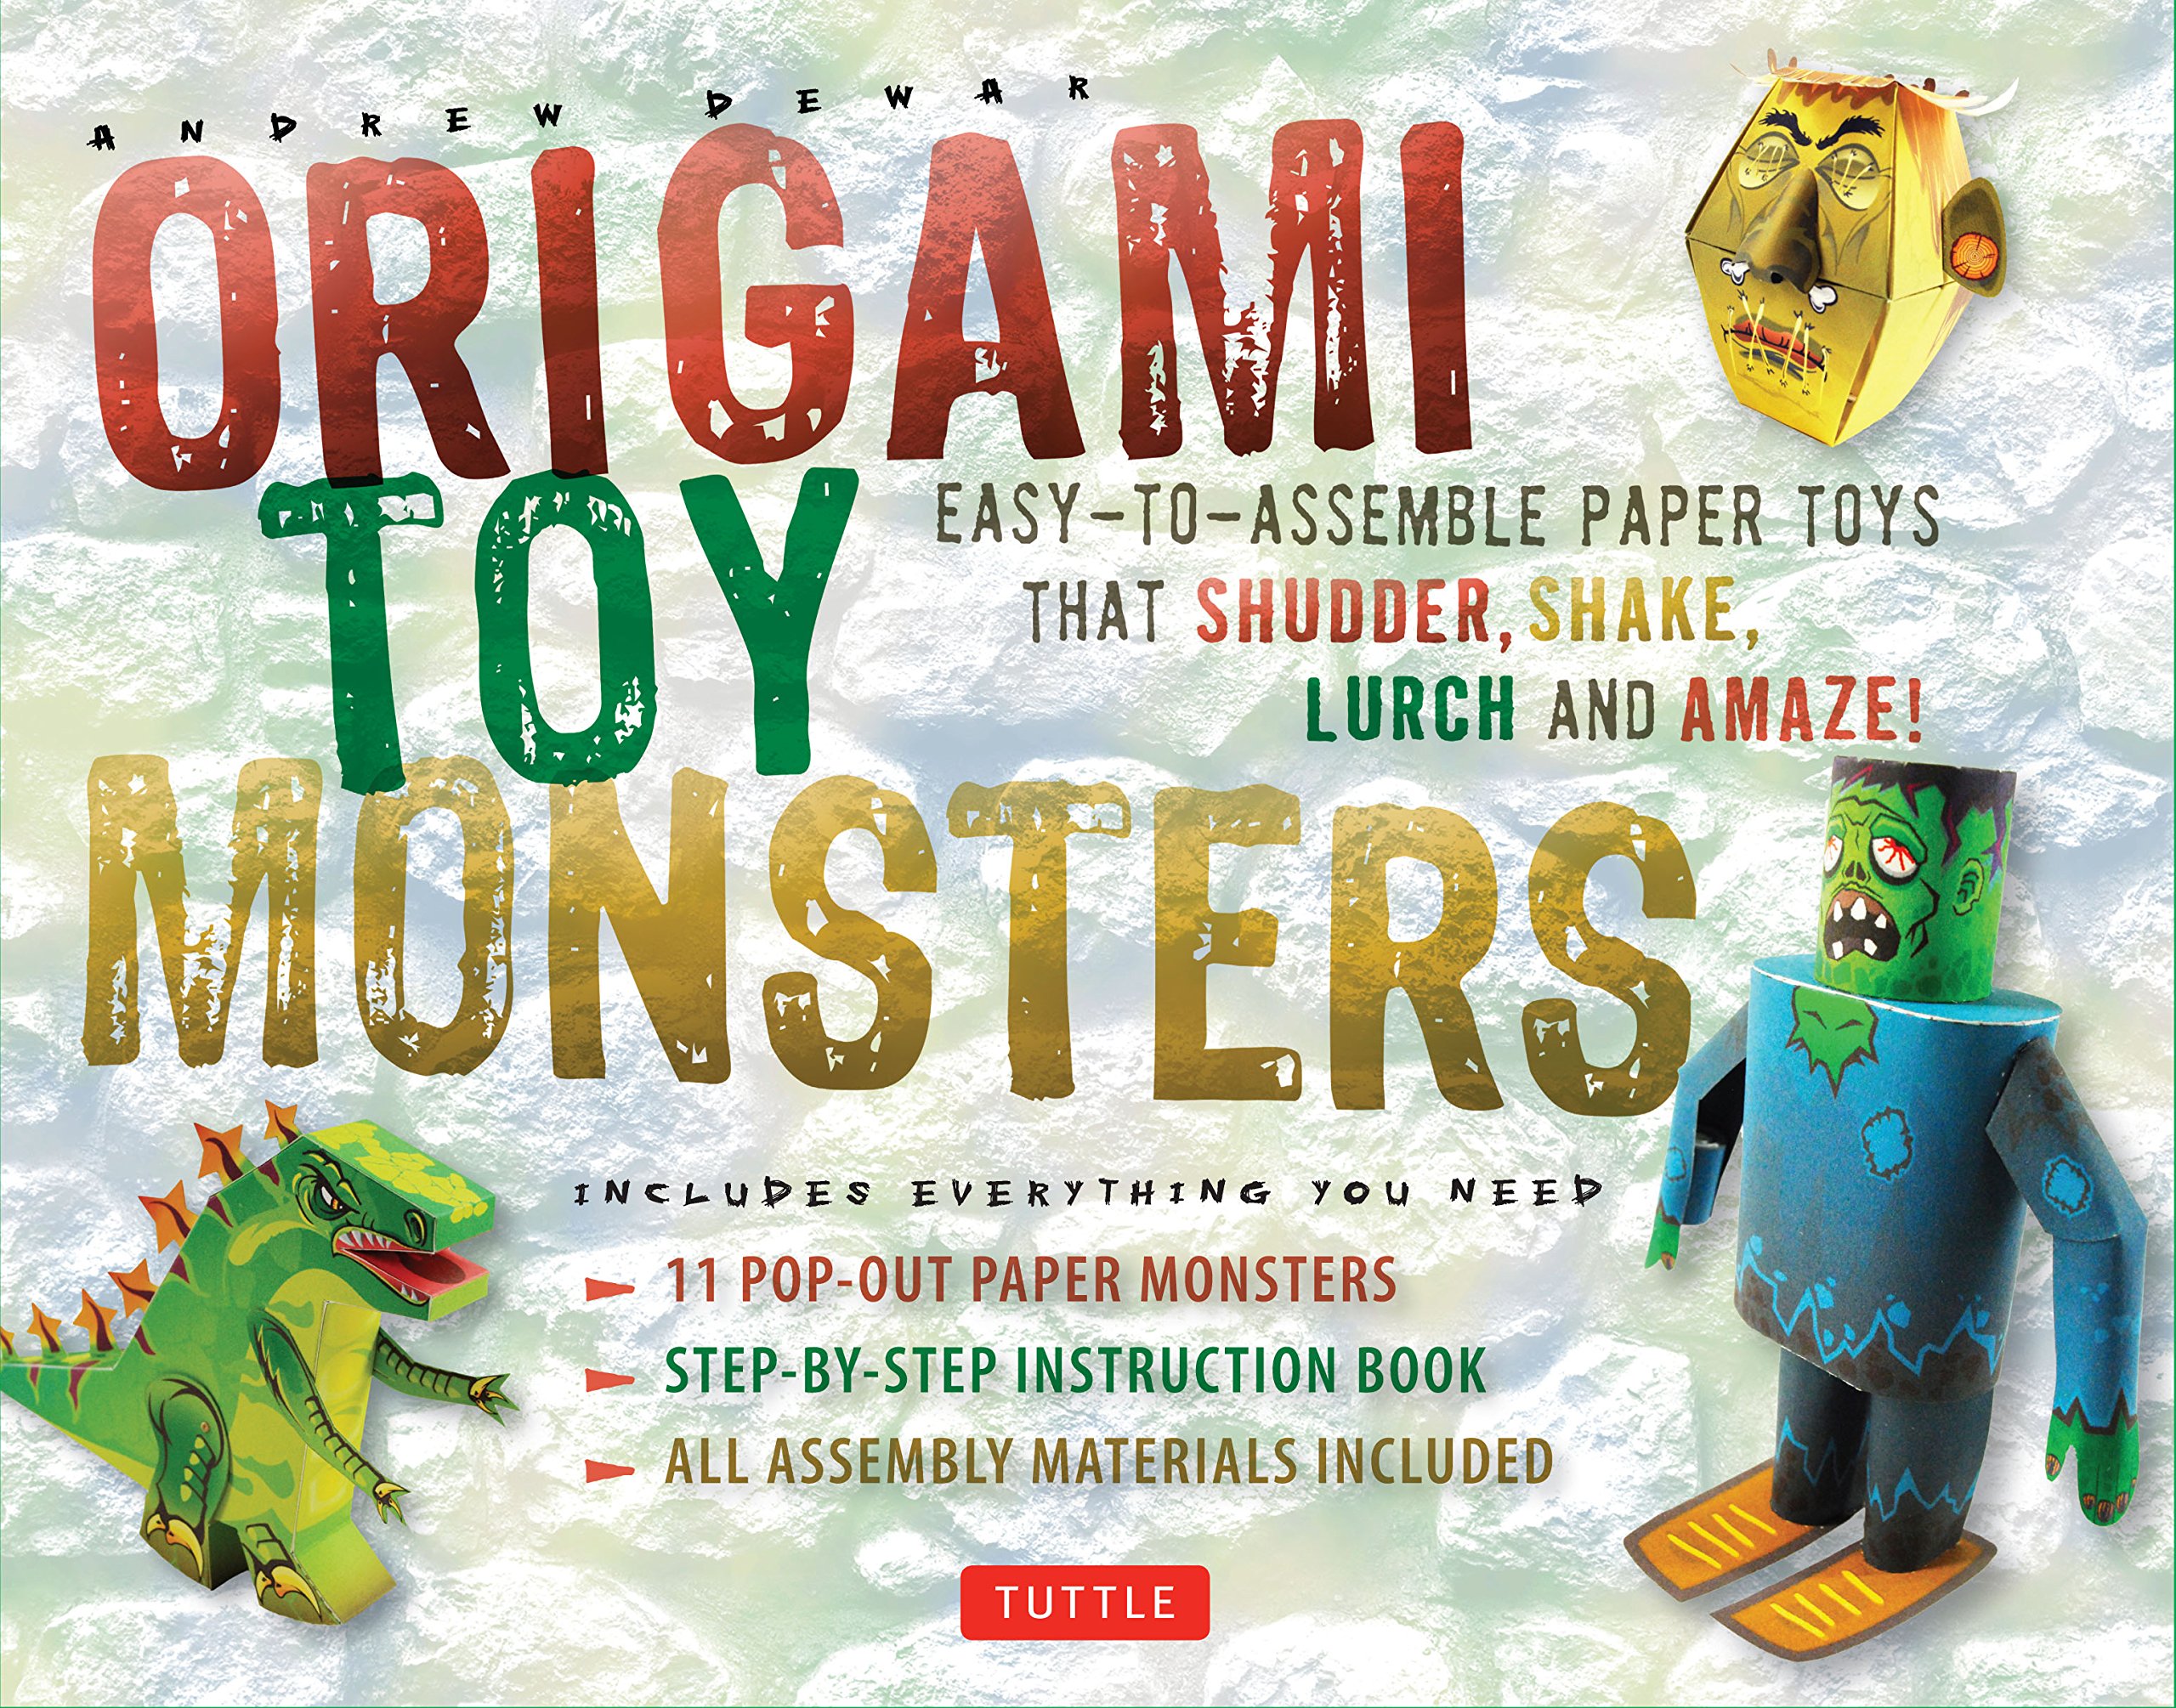 Toy　Origami　Andrew　Monsters　Dewar